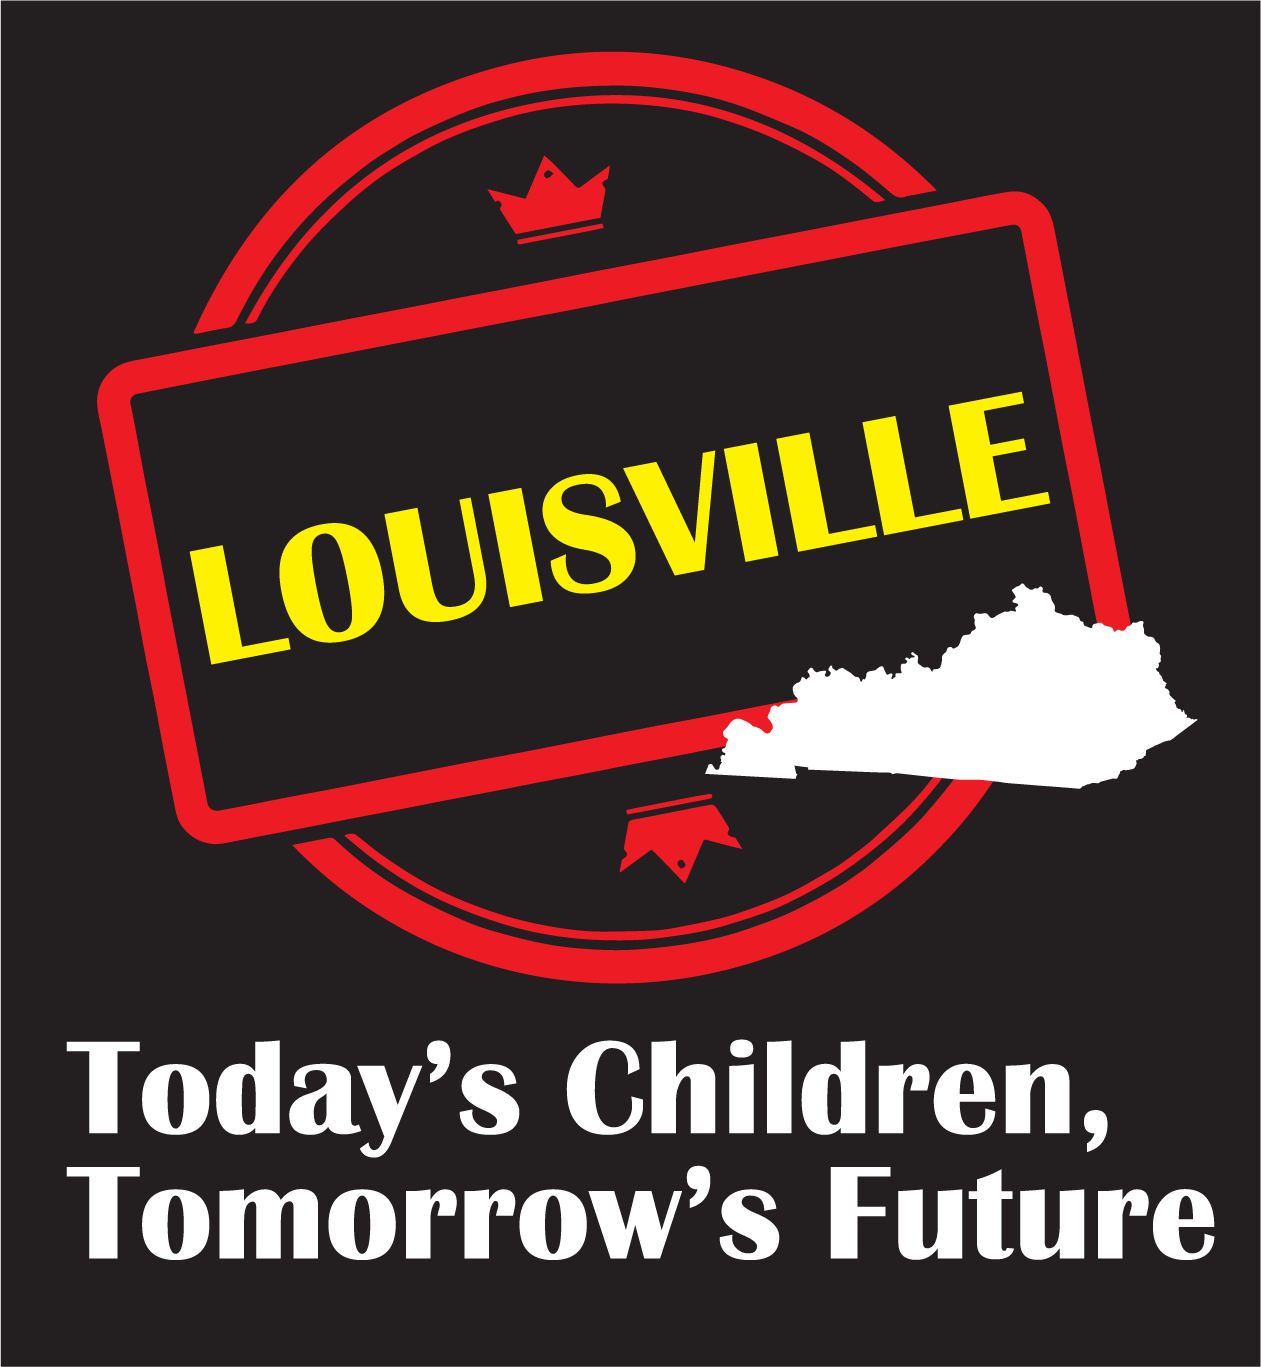 Image for Today's Children Tomorrow's Future - Louisville